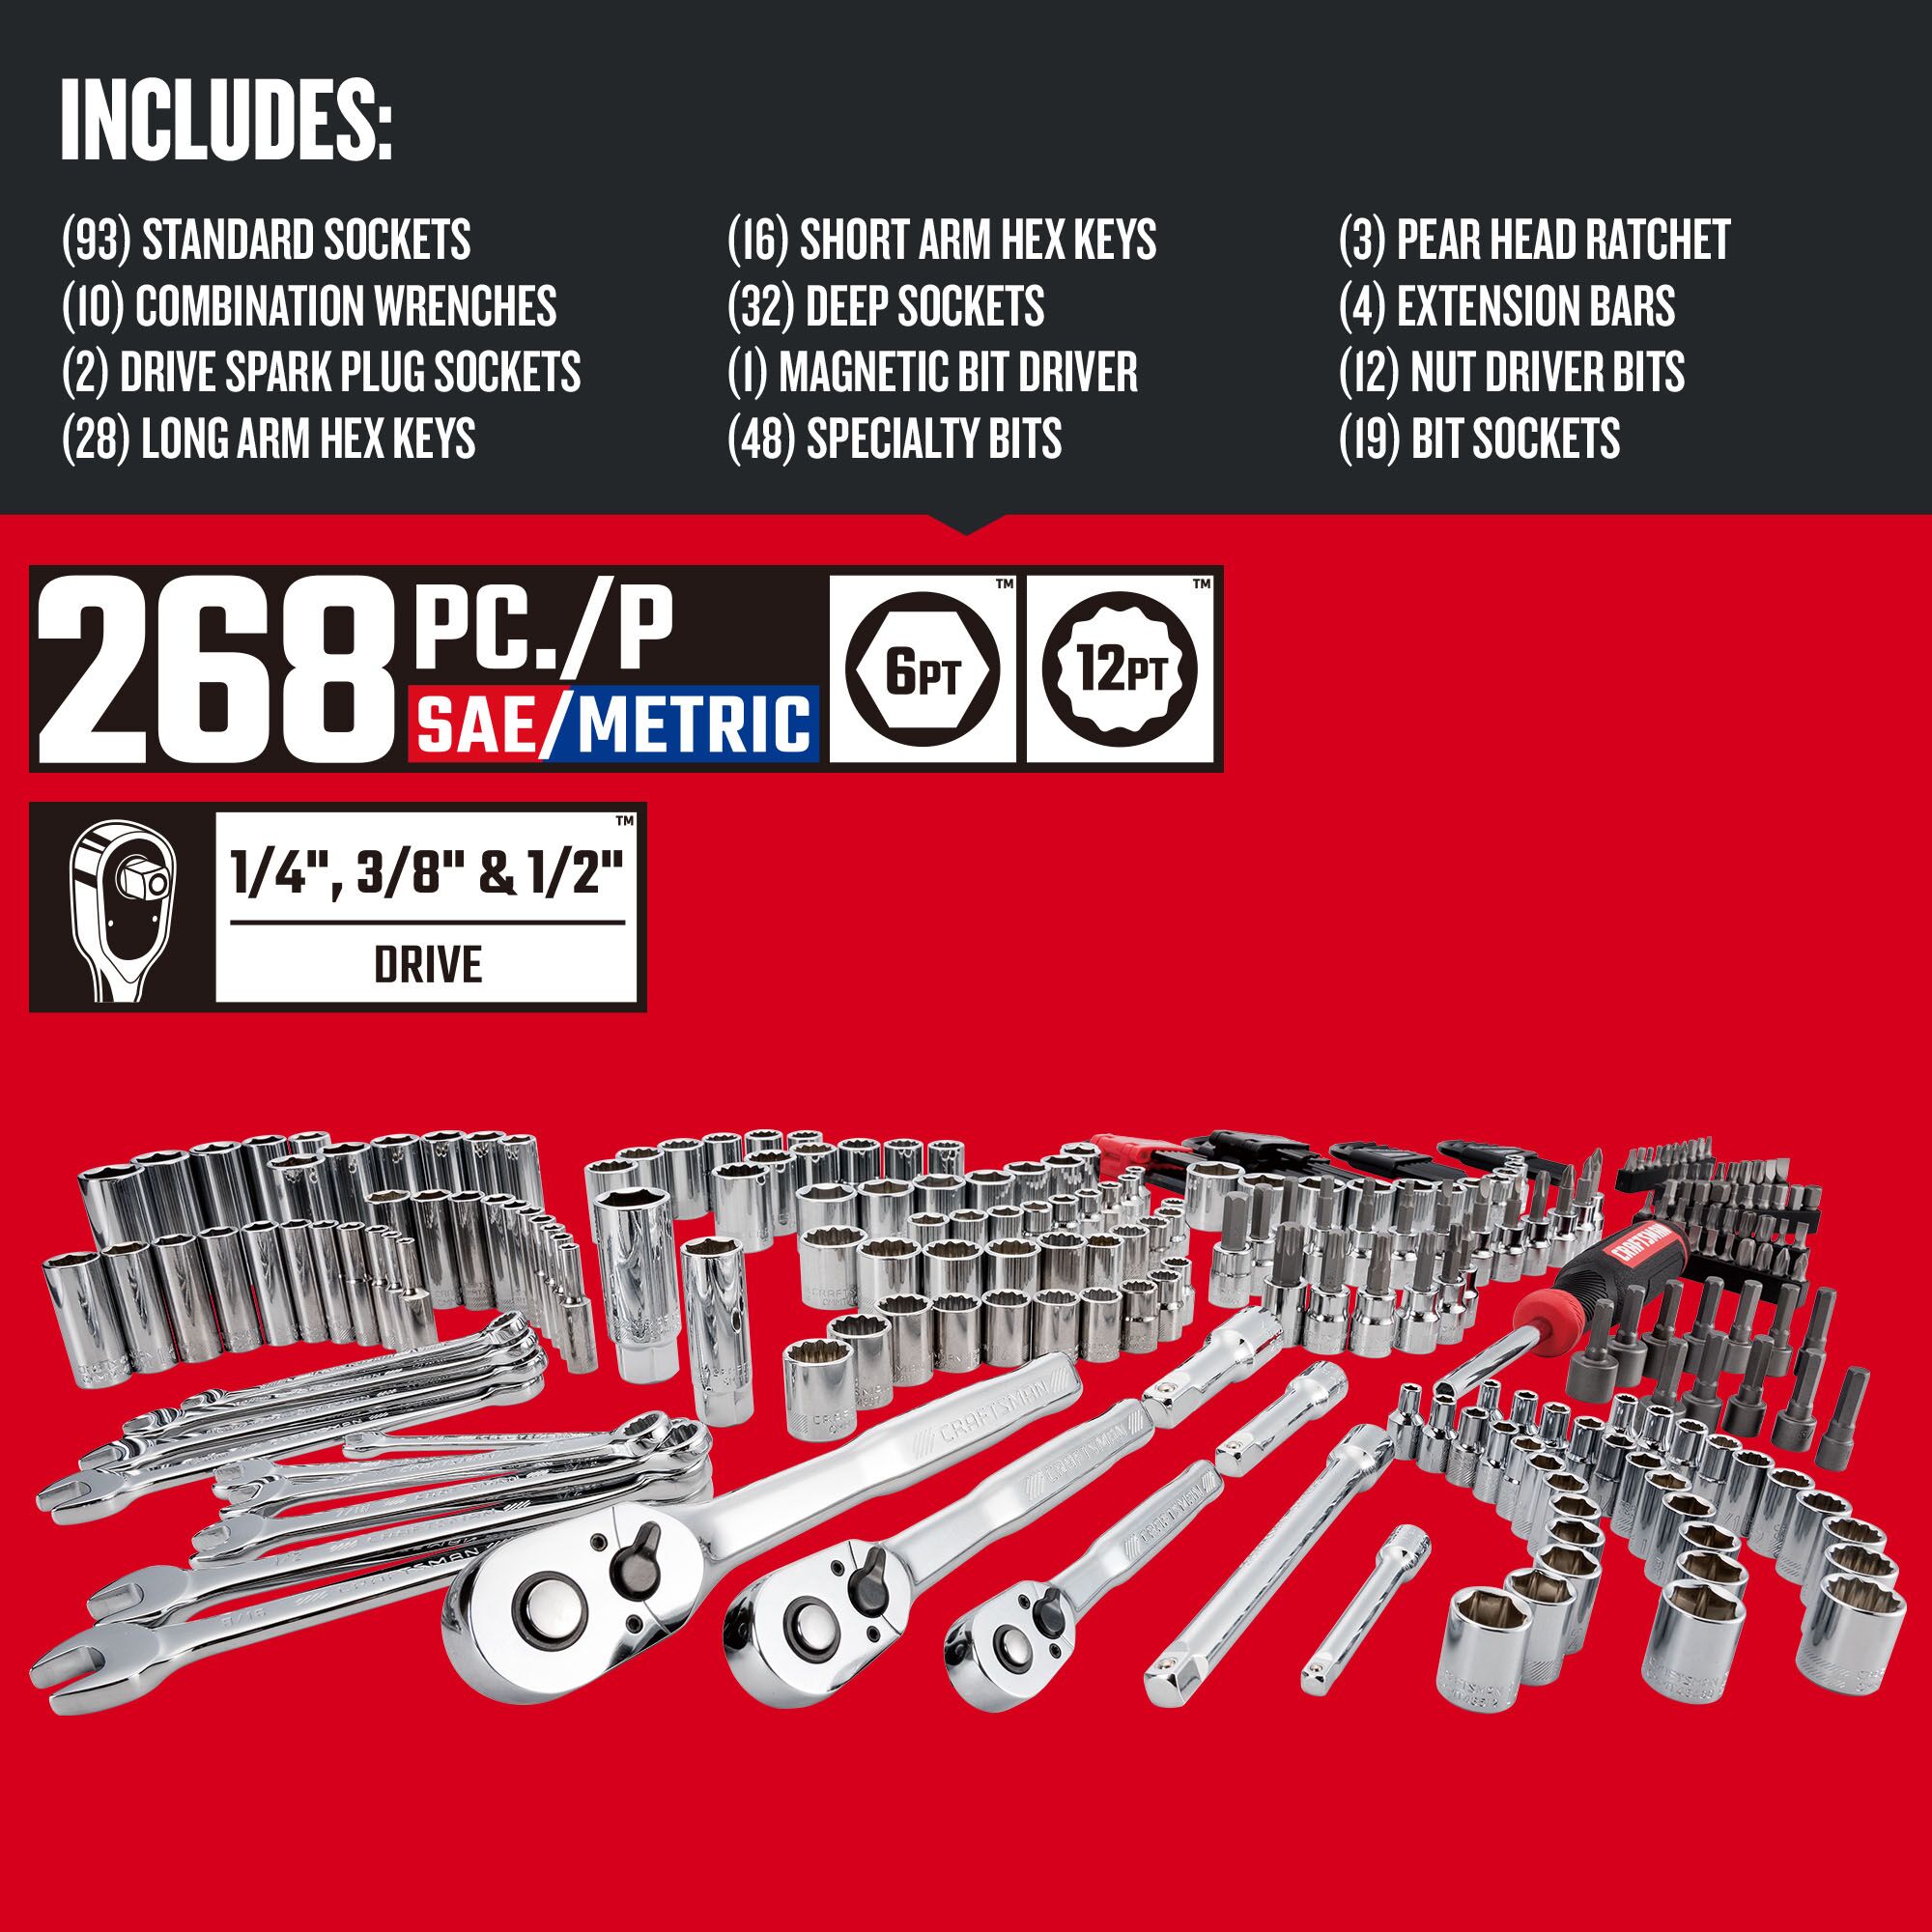 Graphic of CRAFTSMAN Mechanics Tool Set highlighting product features